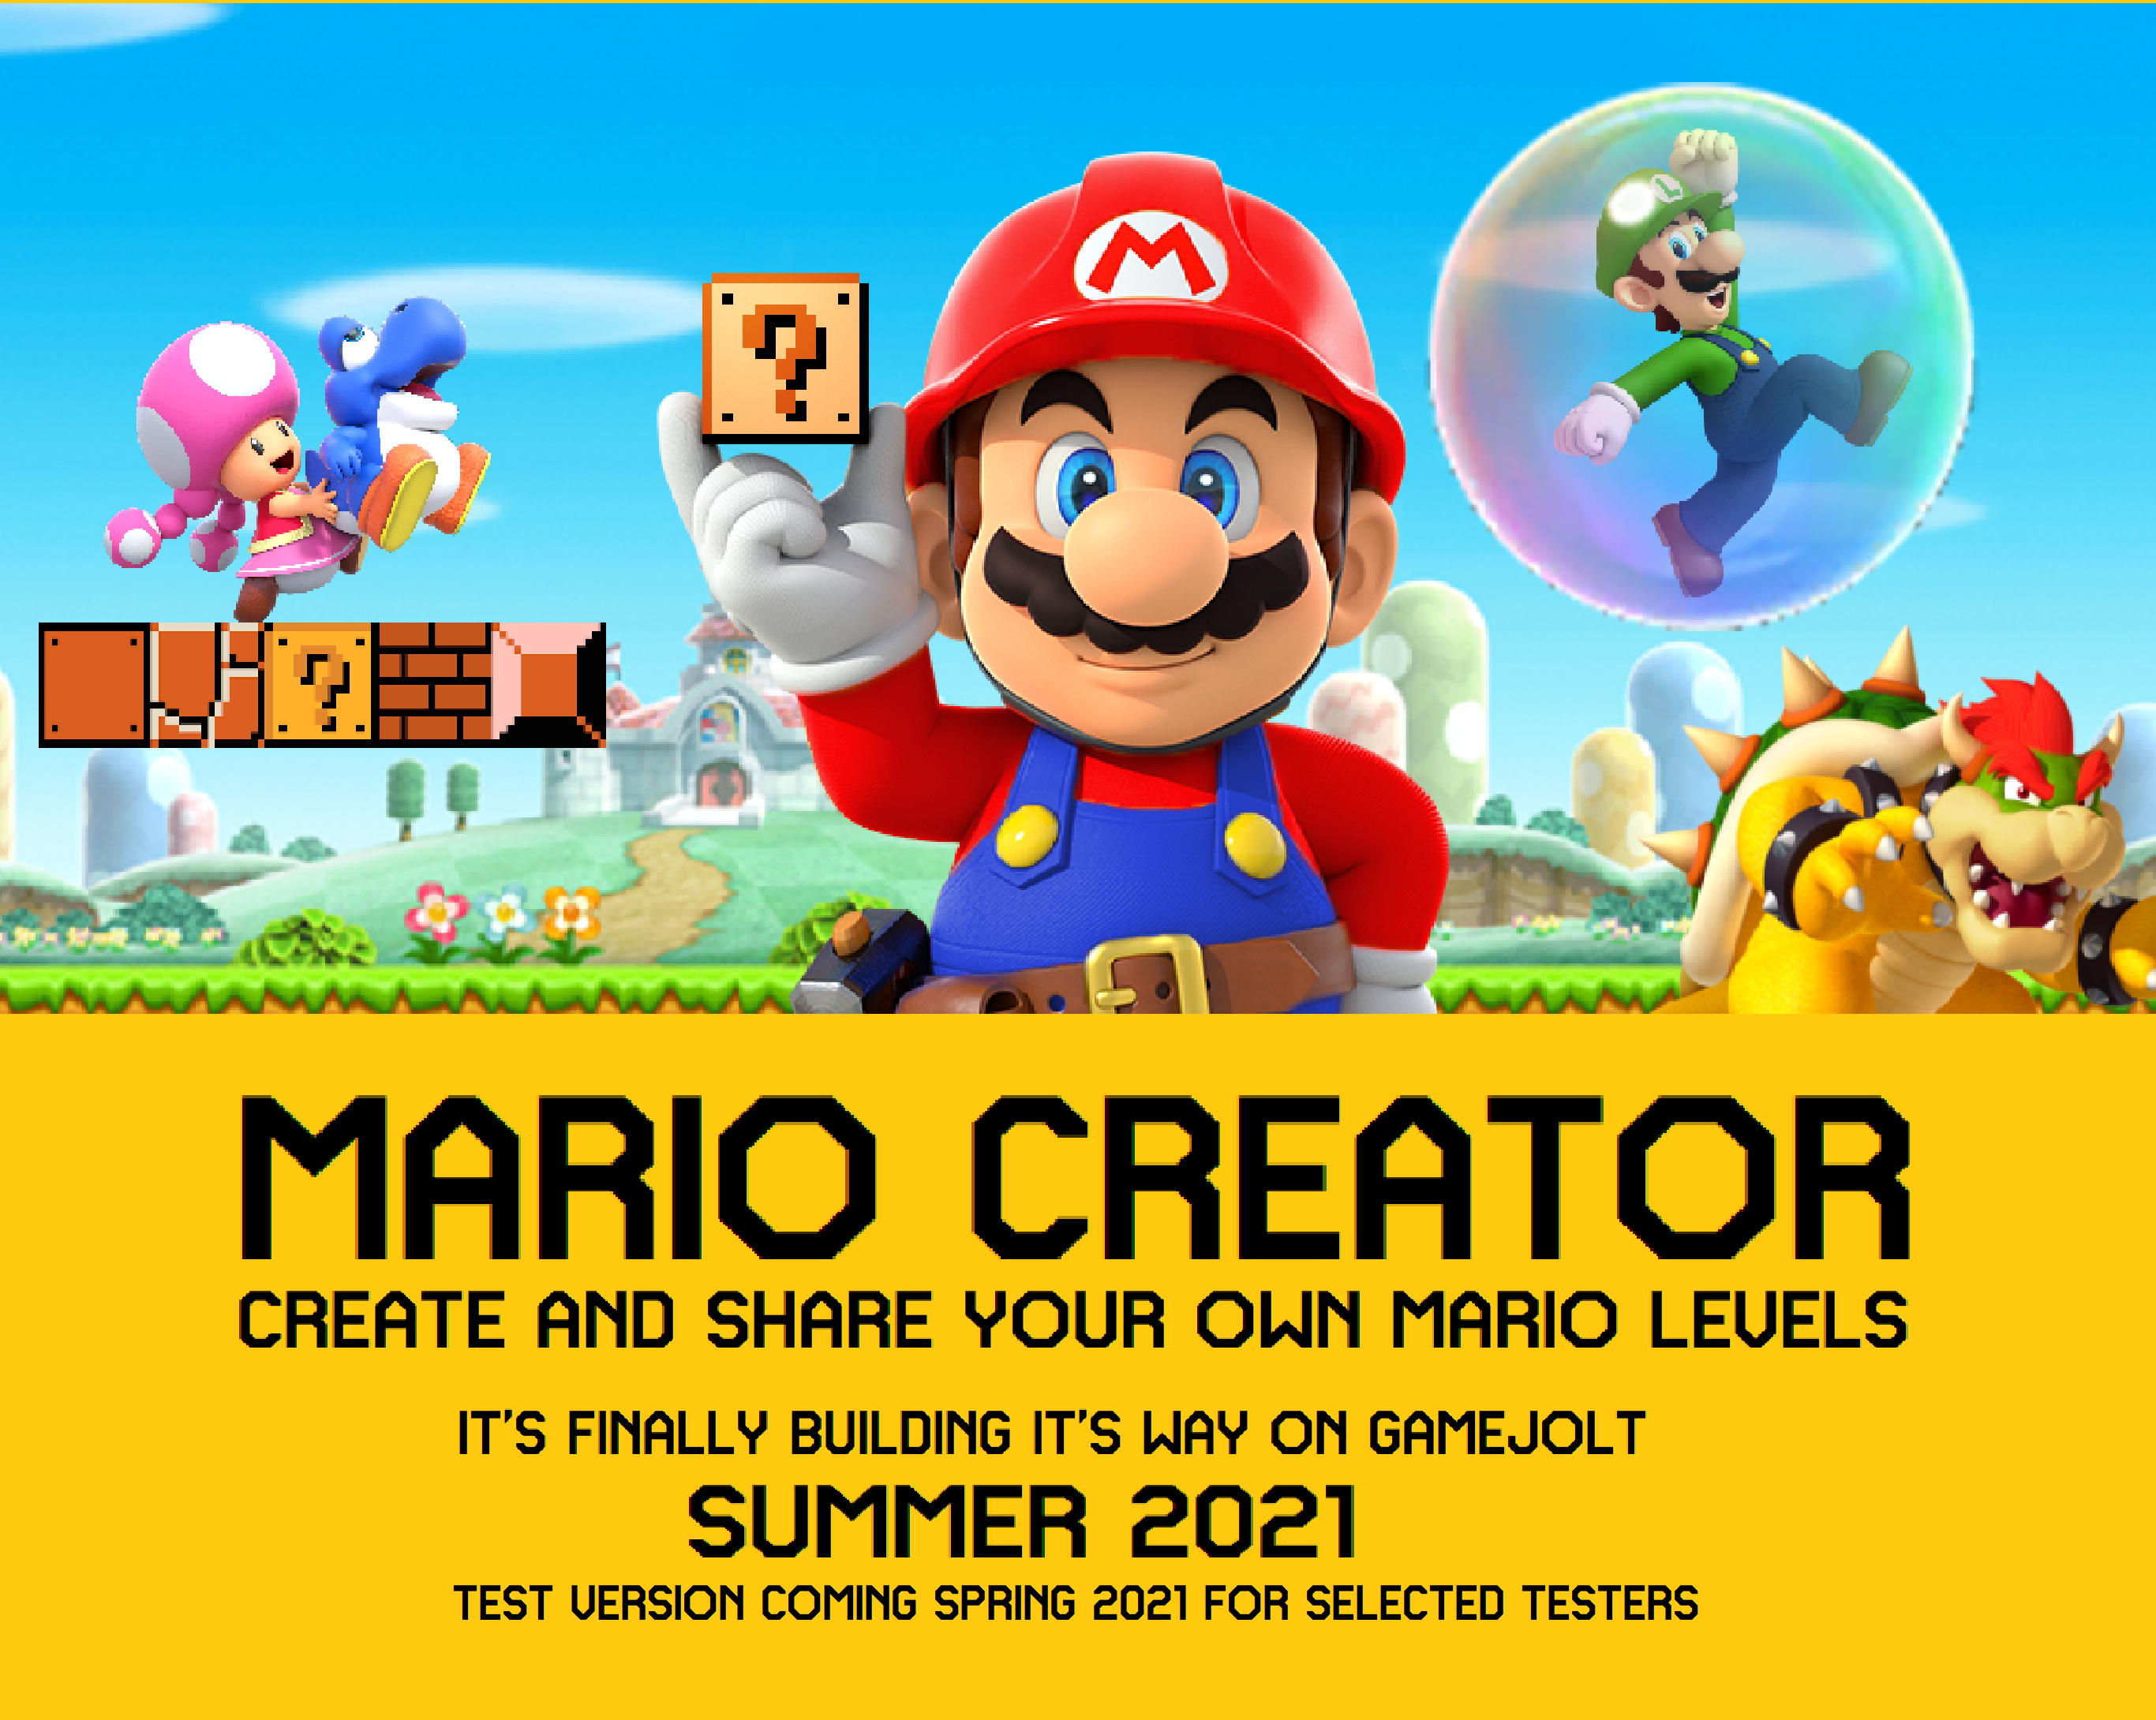 It's official, Mario Creator will officialy build it's way to Gamej